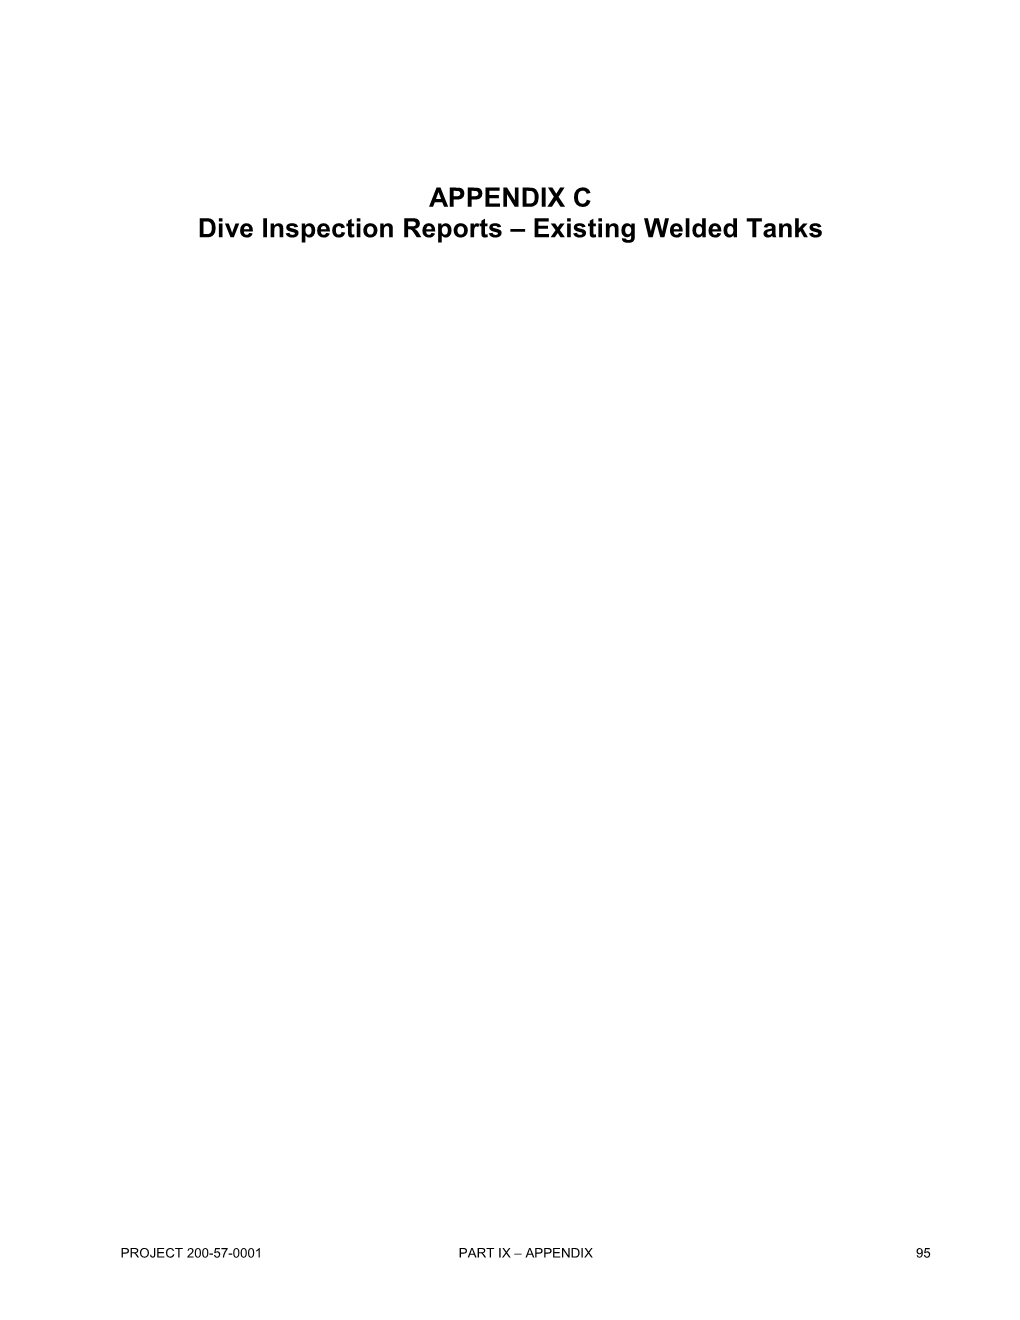 APPENDIX C Dive Inspection Reports – Existing Welded Tanks